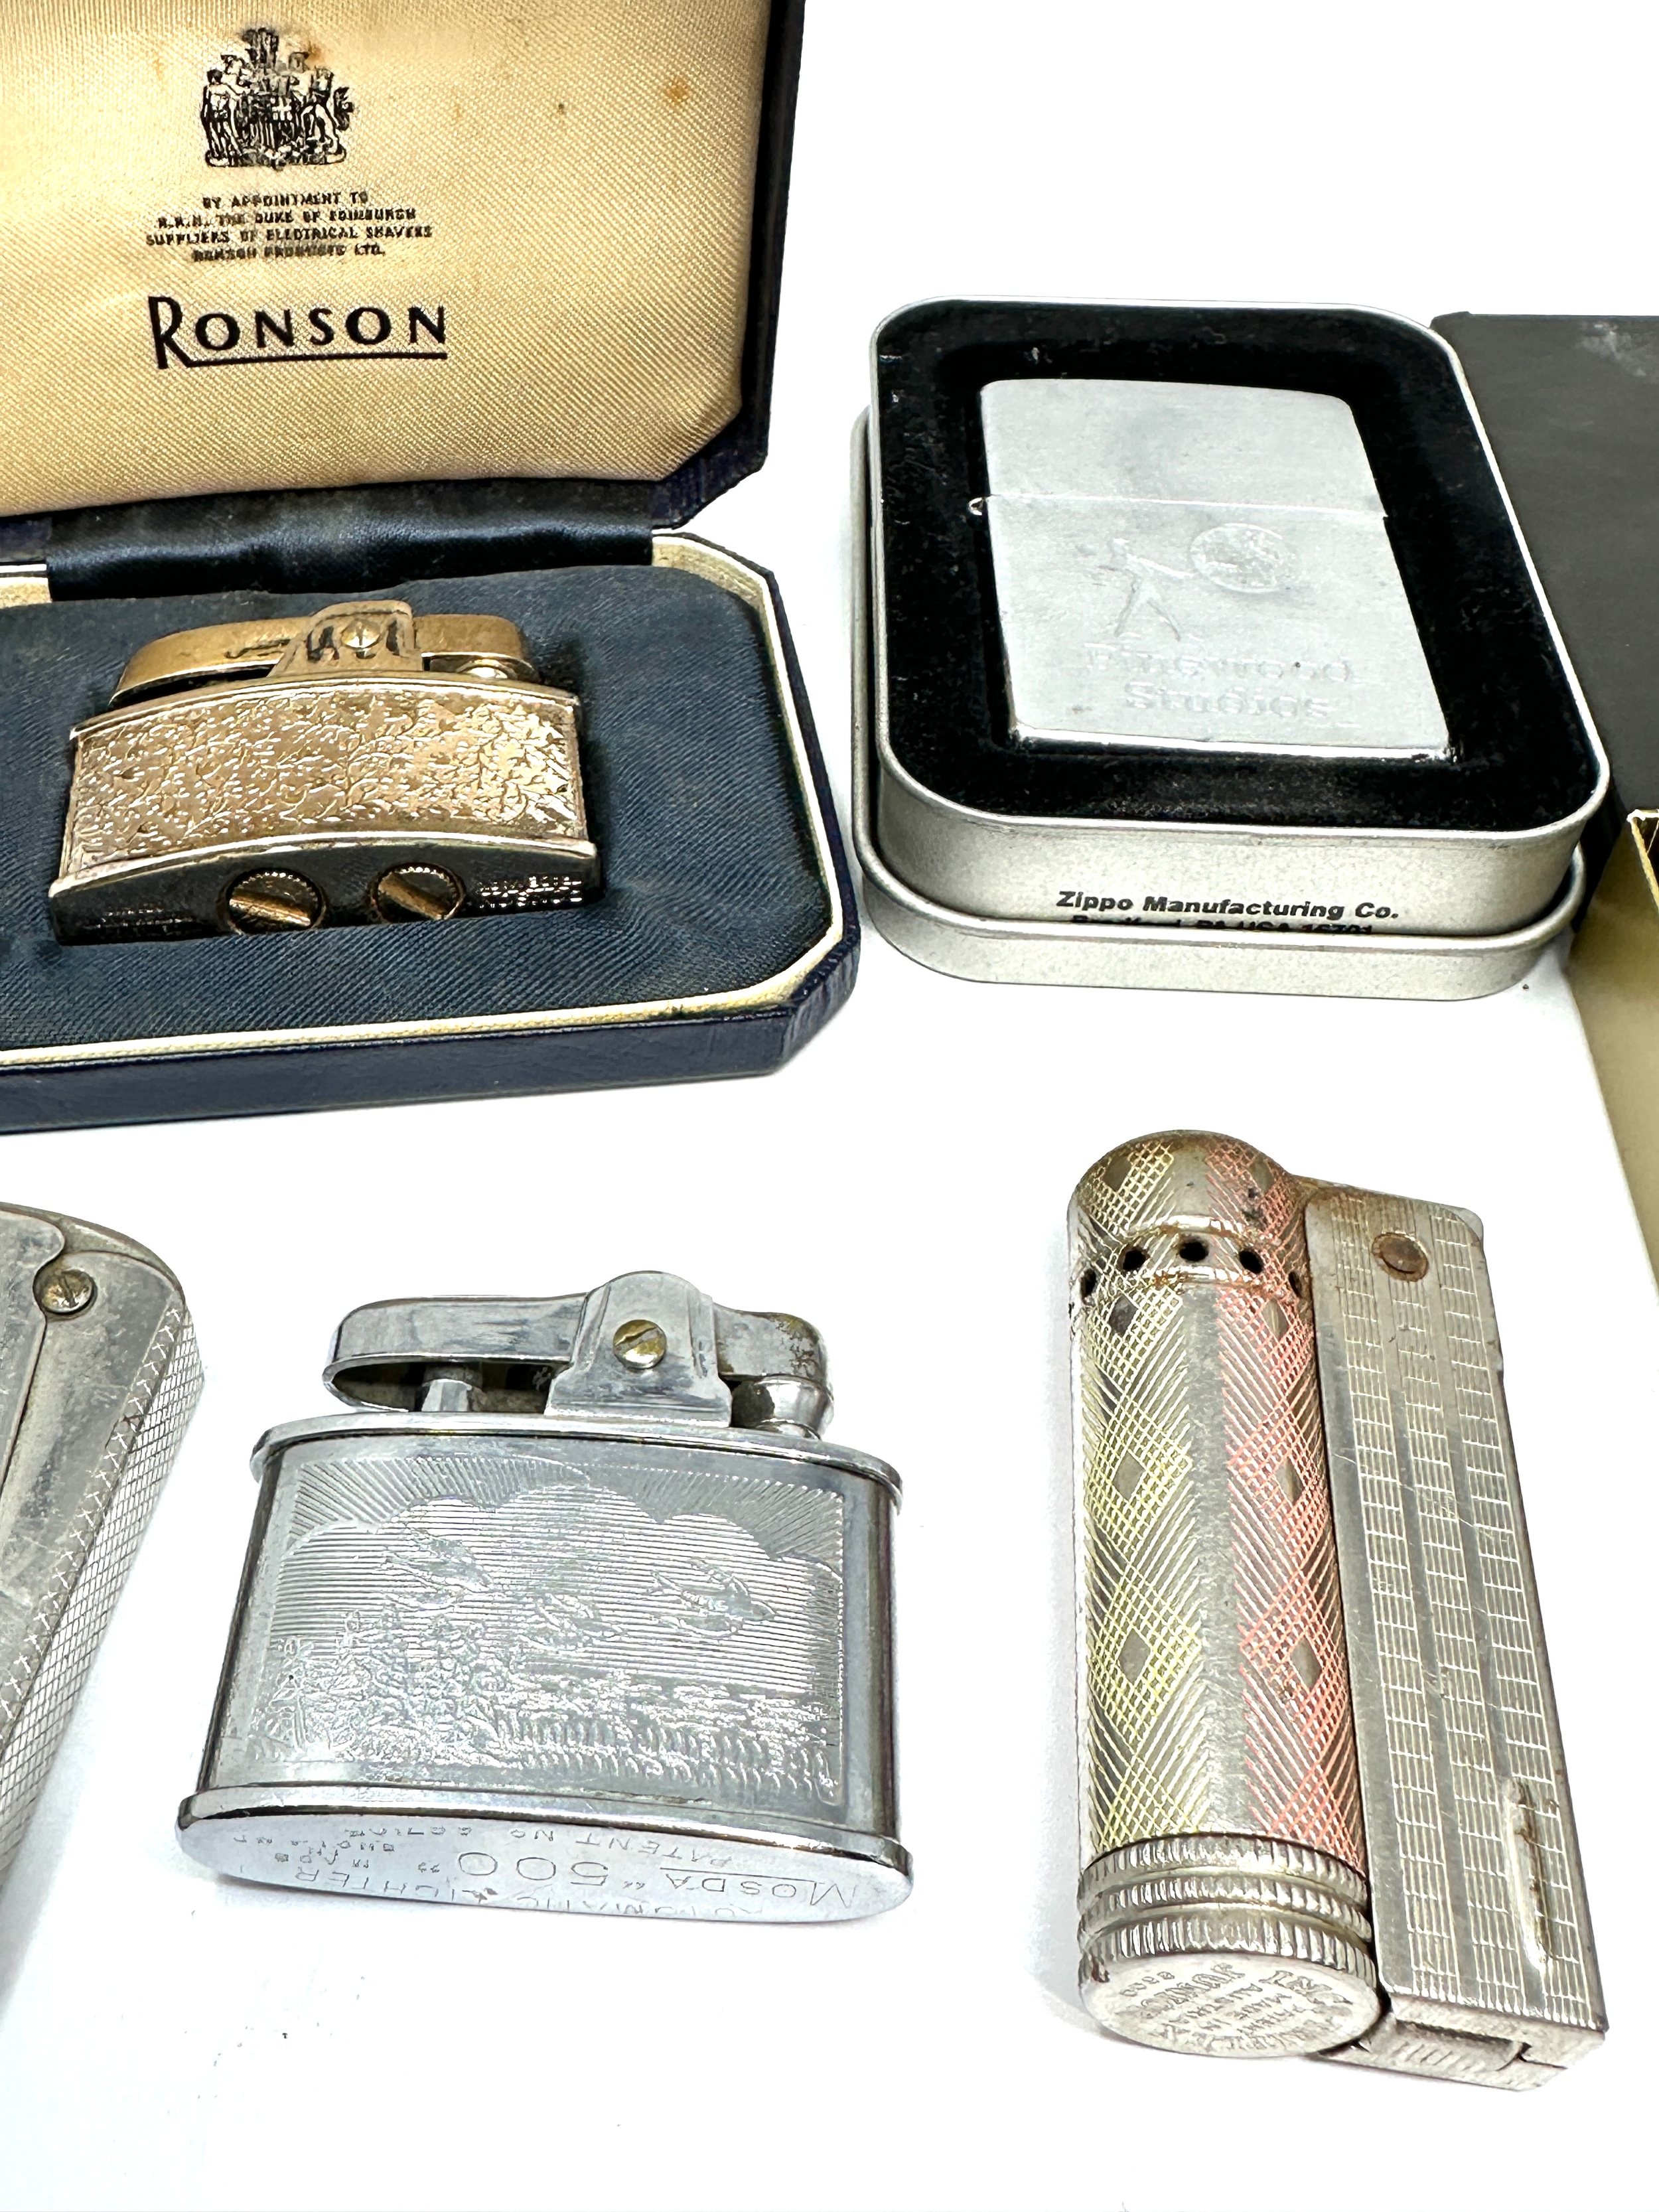 Collection of vintage cigarette lighters includes zippo etc - Image 3 of 4